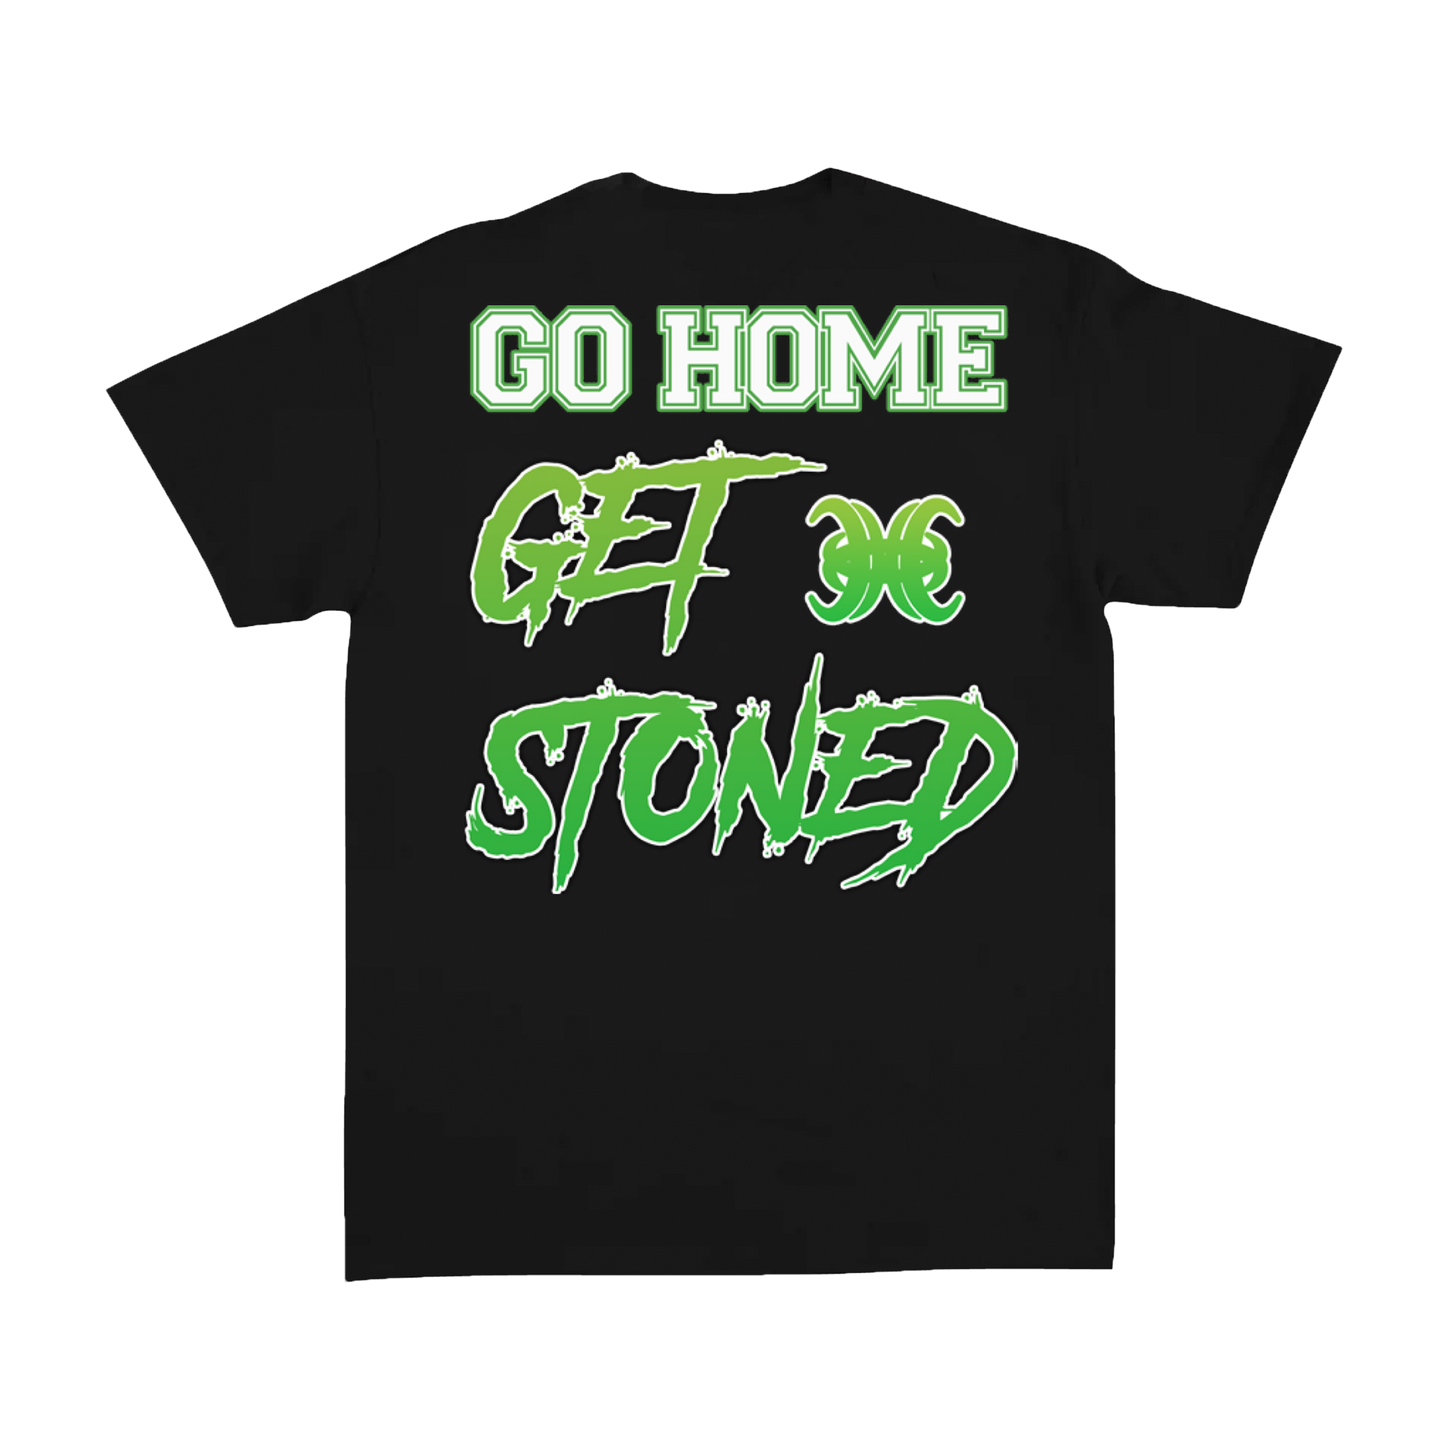 Get Stoned T-shirt